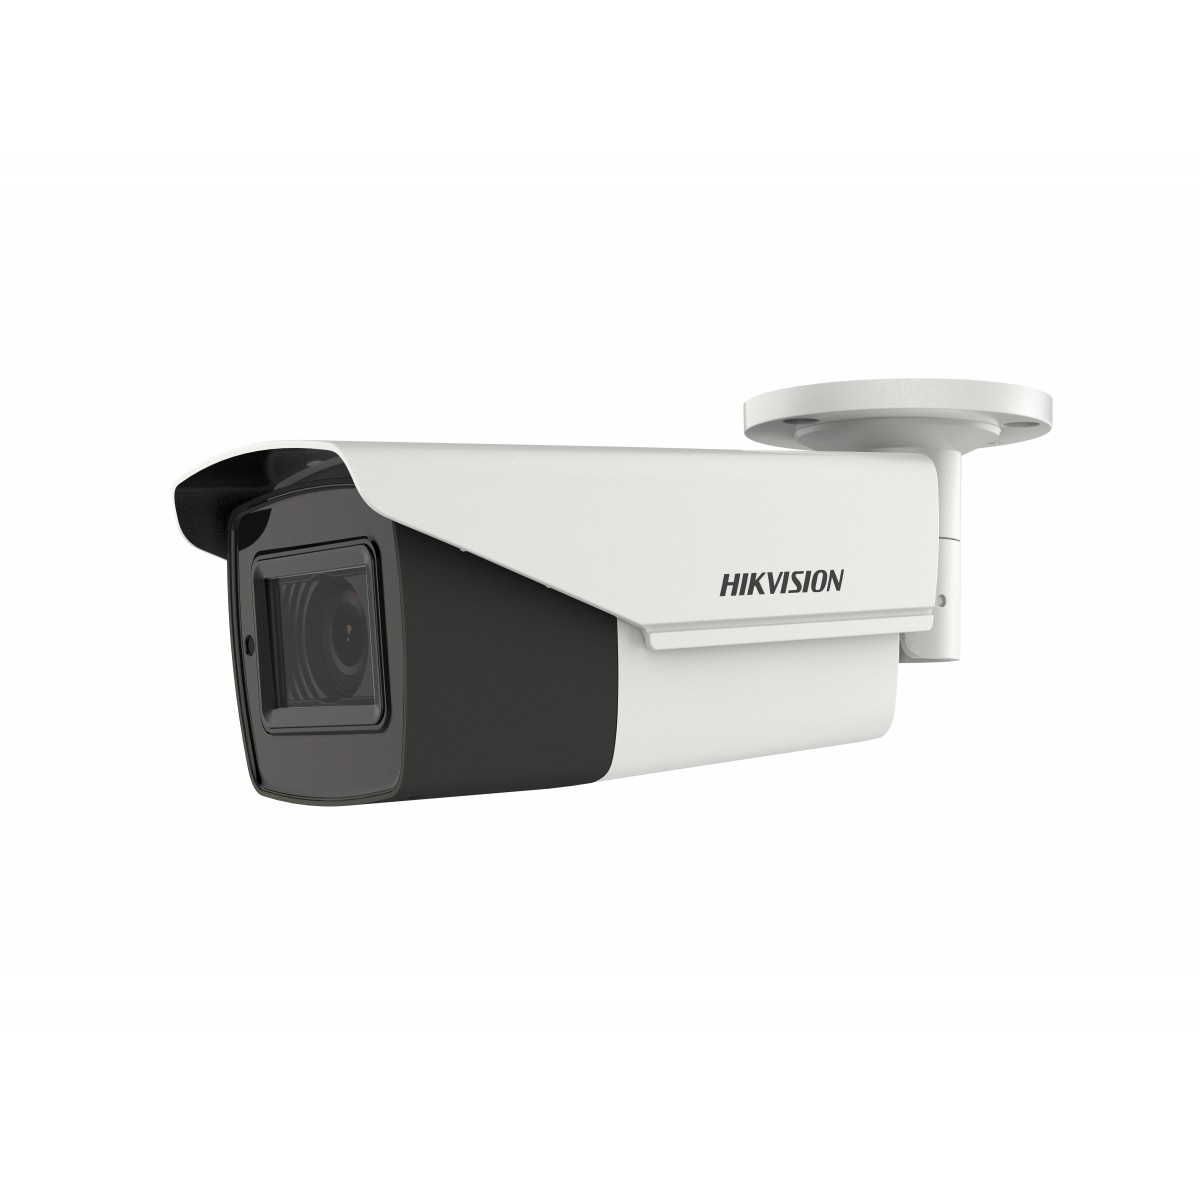 Hikvision Digital Technology DS-2CE19H8T-AIT3ZF - IP security camera - Indoor & outdoor - Wired - English - Bullet - Ceiling/Wal